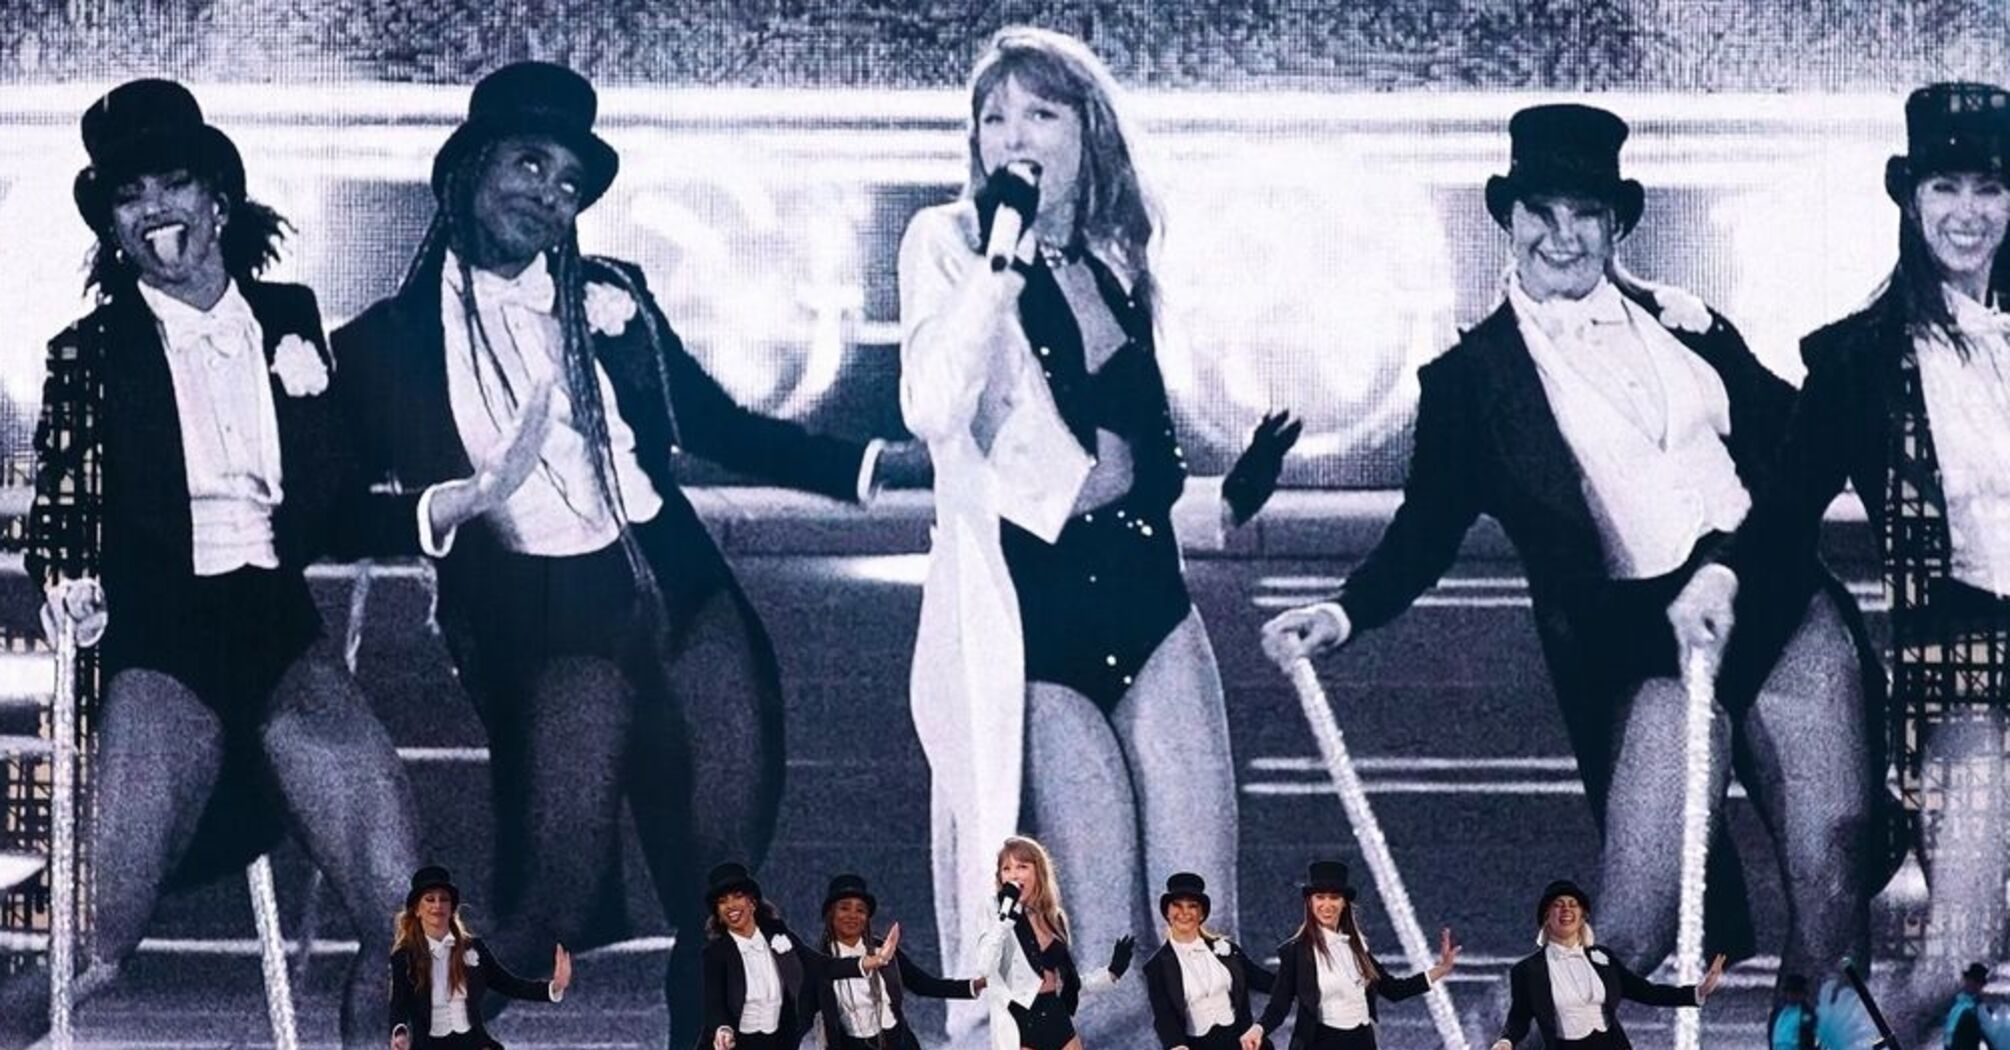 Taylor Swift's concert in Zurich caused an earthquake (photo)